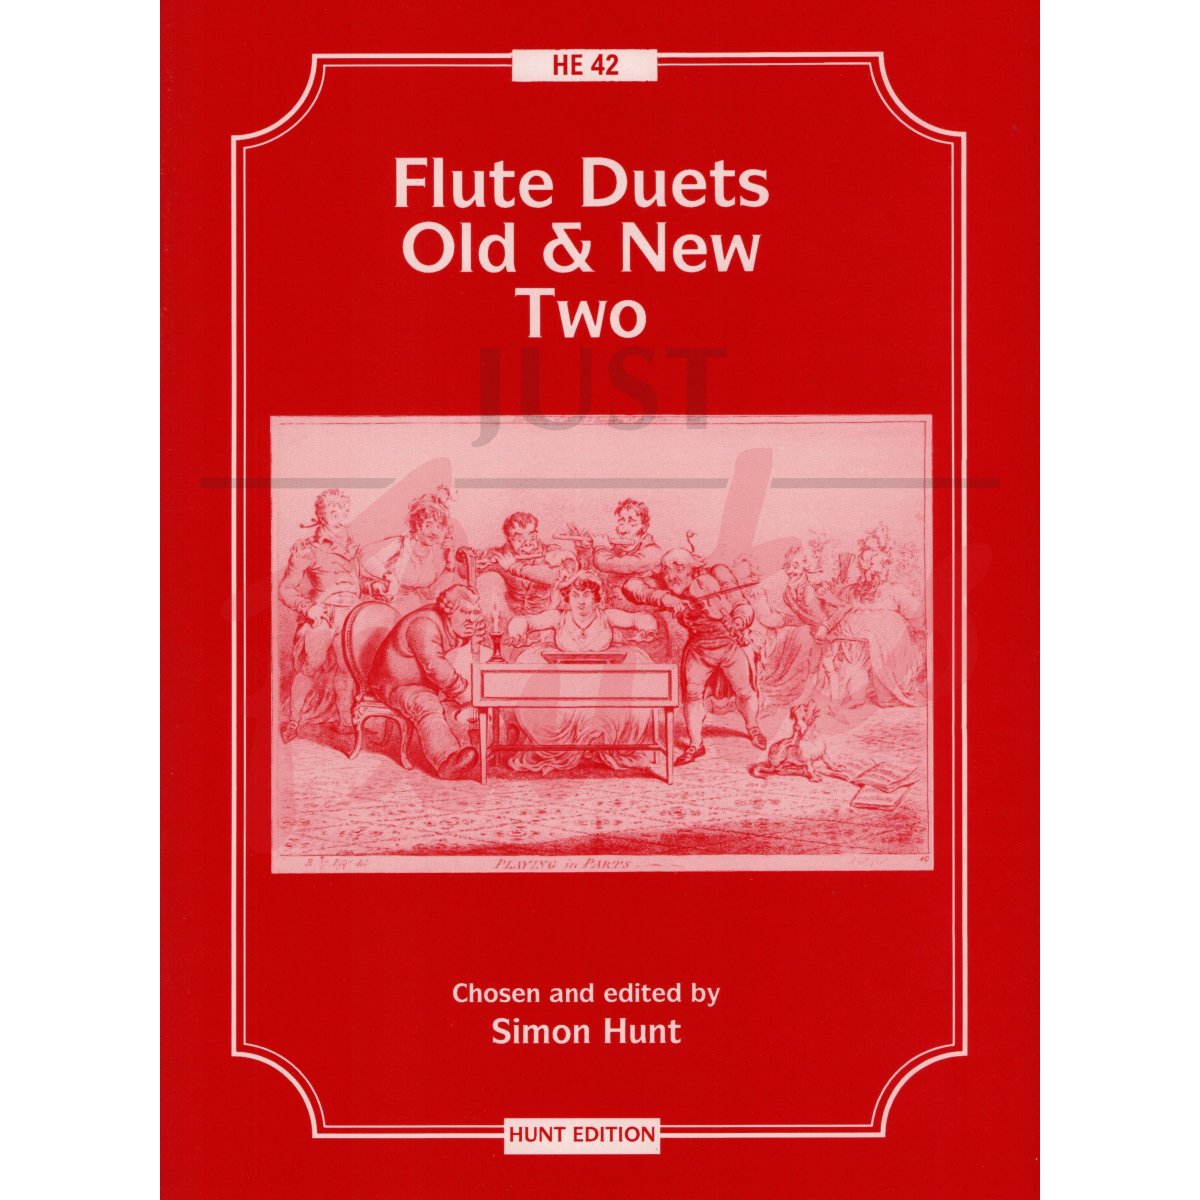 Flute Duets Old and New Two